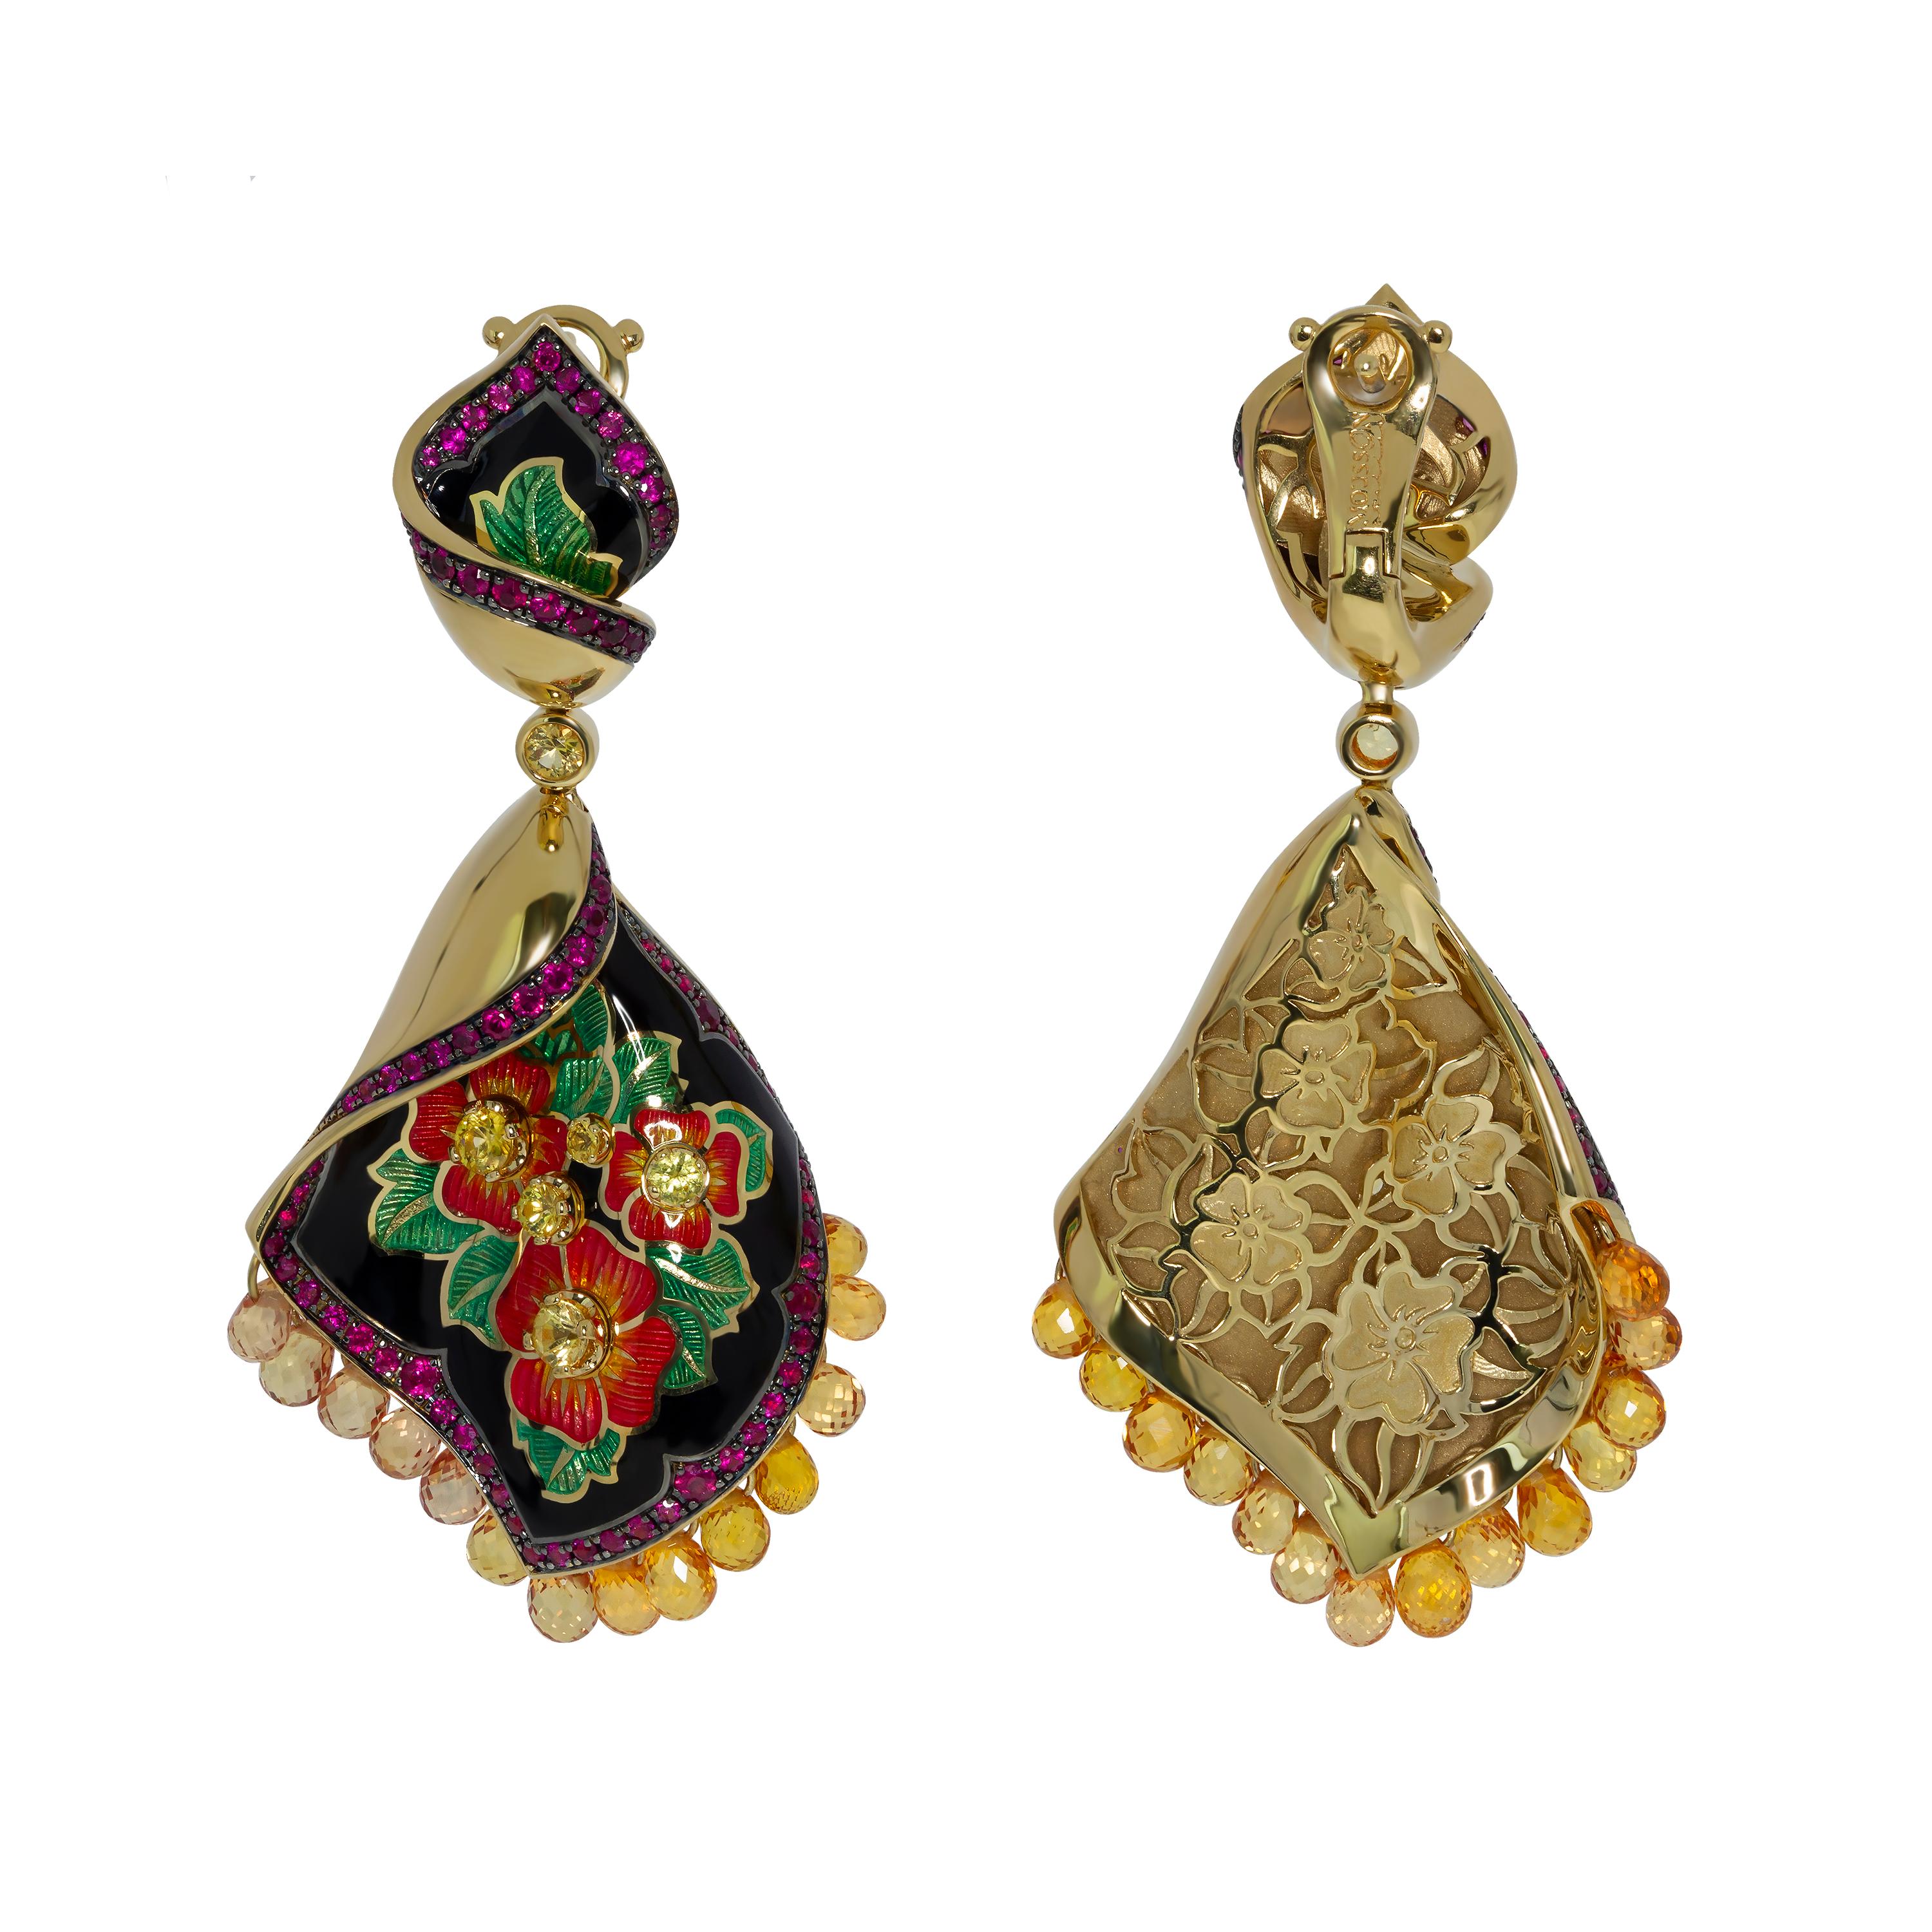 Sapphire Ruby Enamel A'la Russe Earrings
What do you know about Pavlovo Posad shawls? This is a large part of Russian culture, which originated in the 17th century. They are large patterned scarves, which are usually presented as a gift to brides,